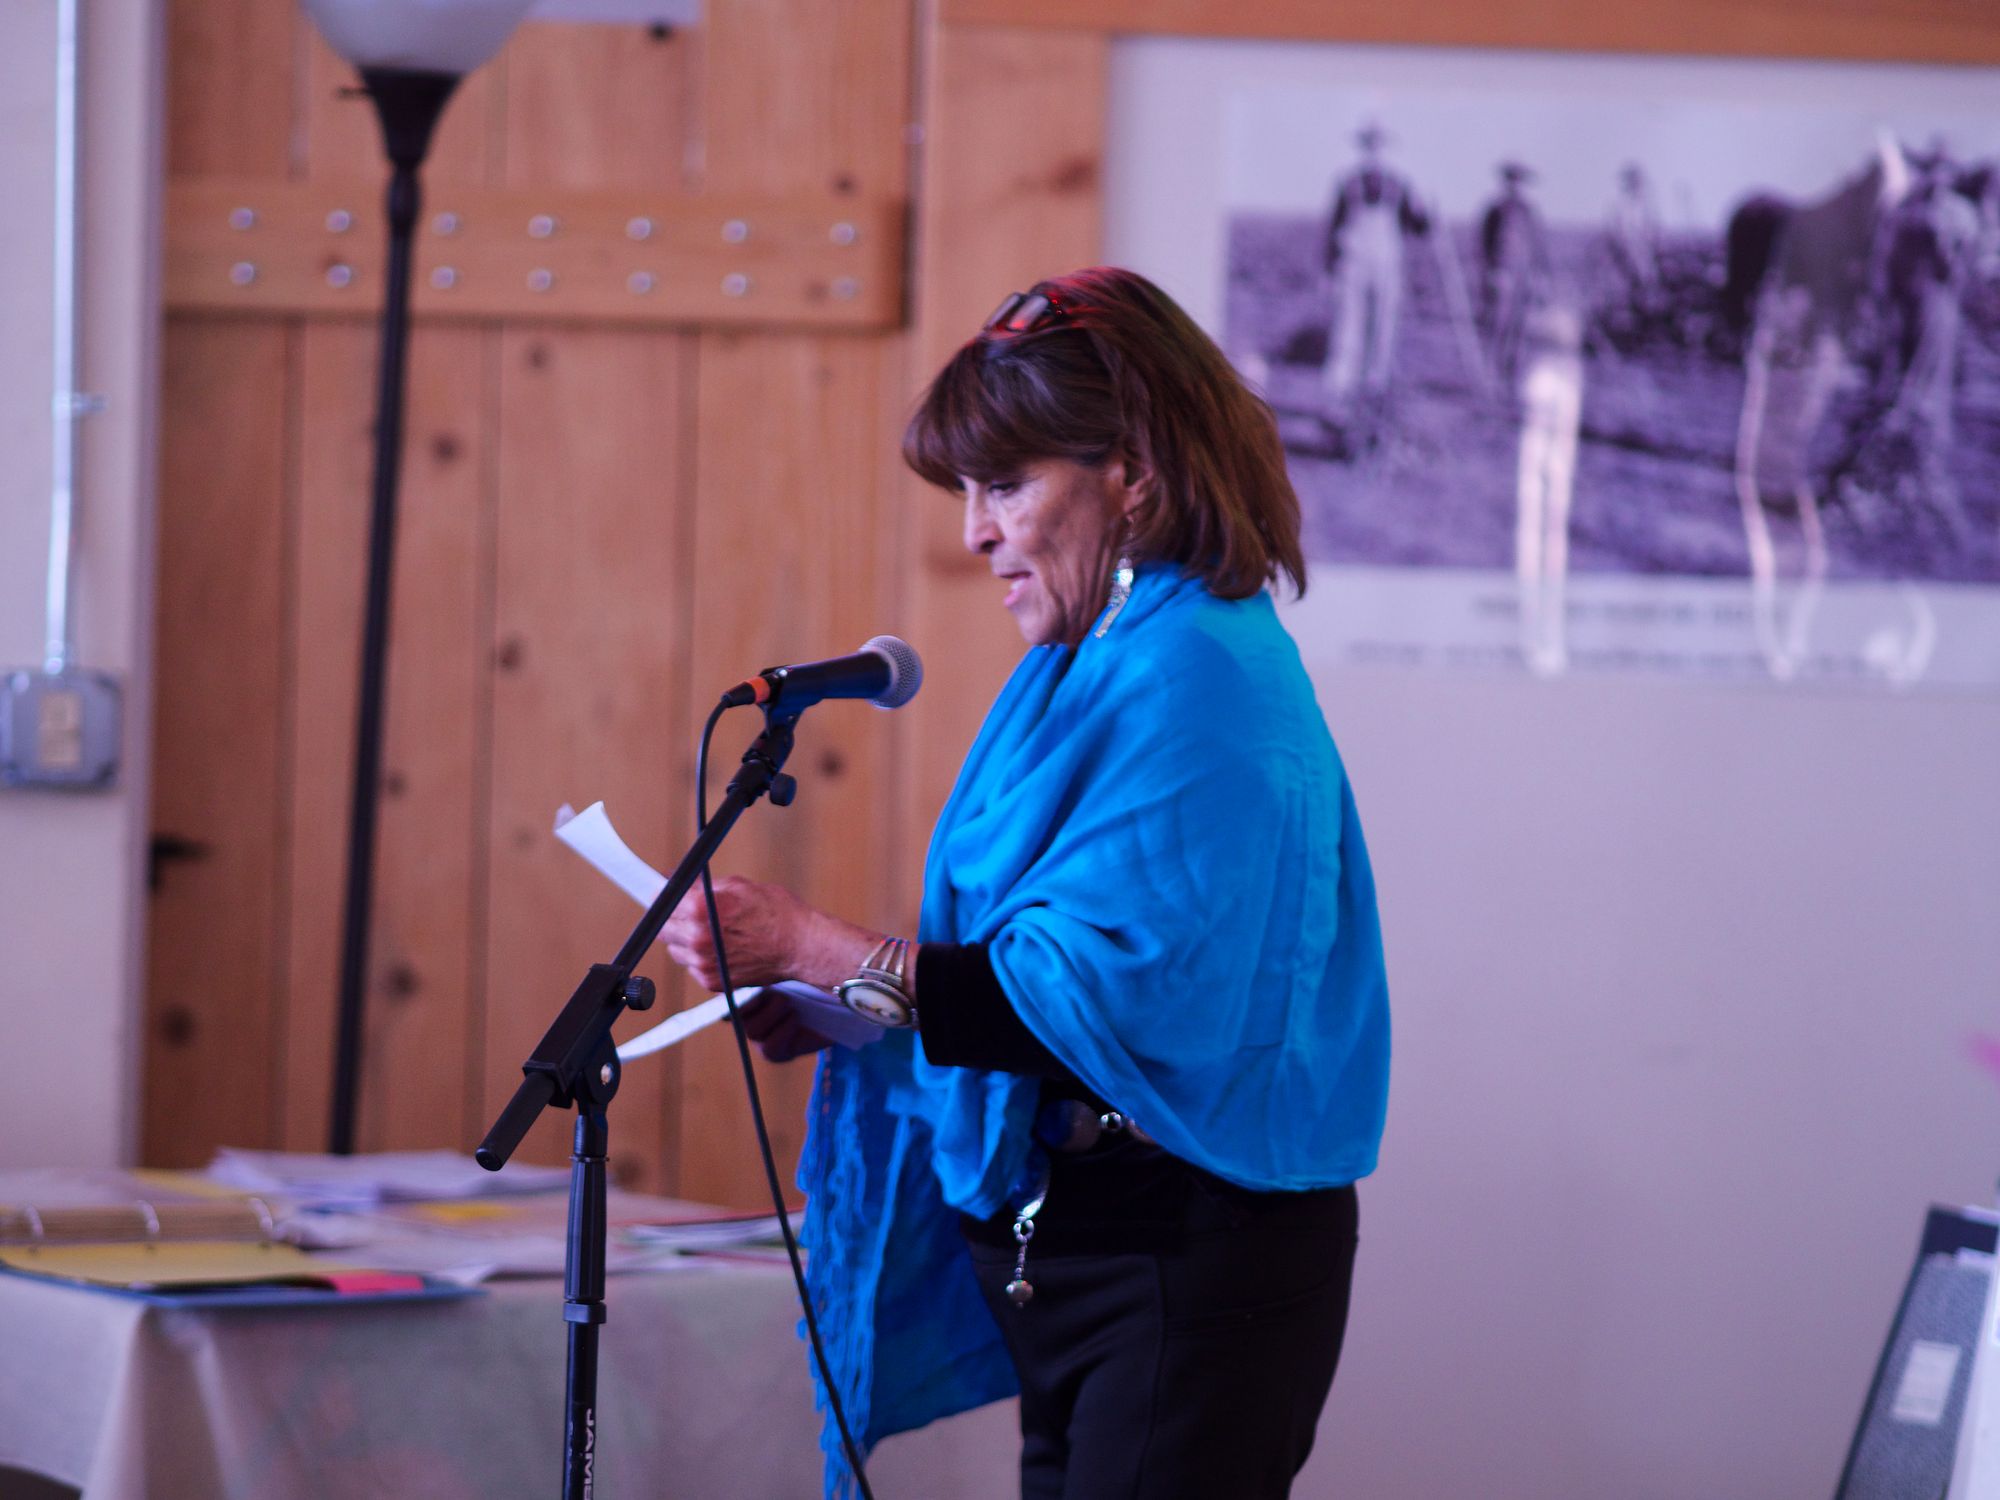 A woman speaks at a microphone while wearing a royal blue shawl and black clothing.